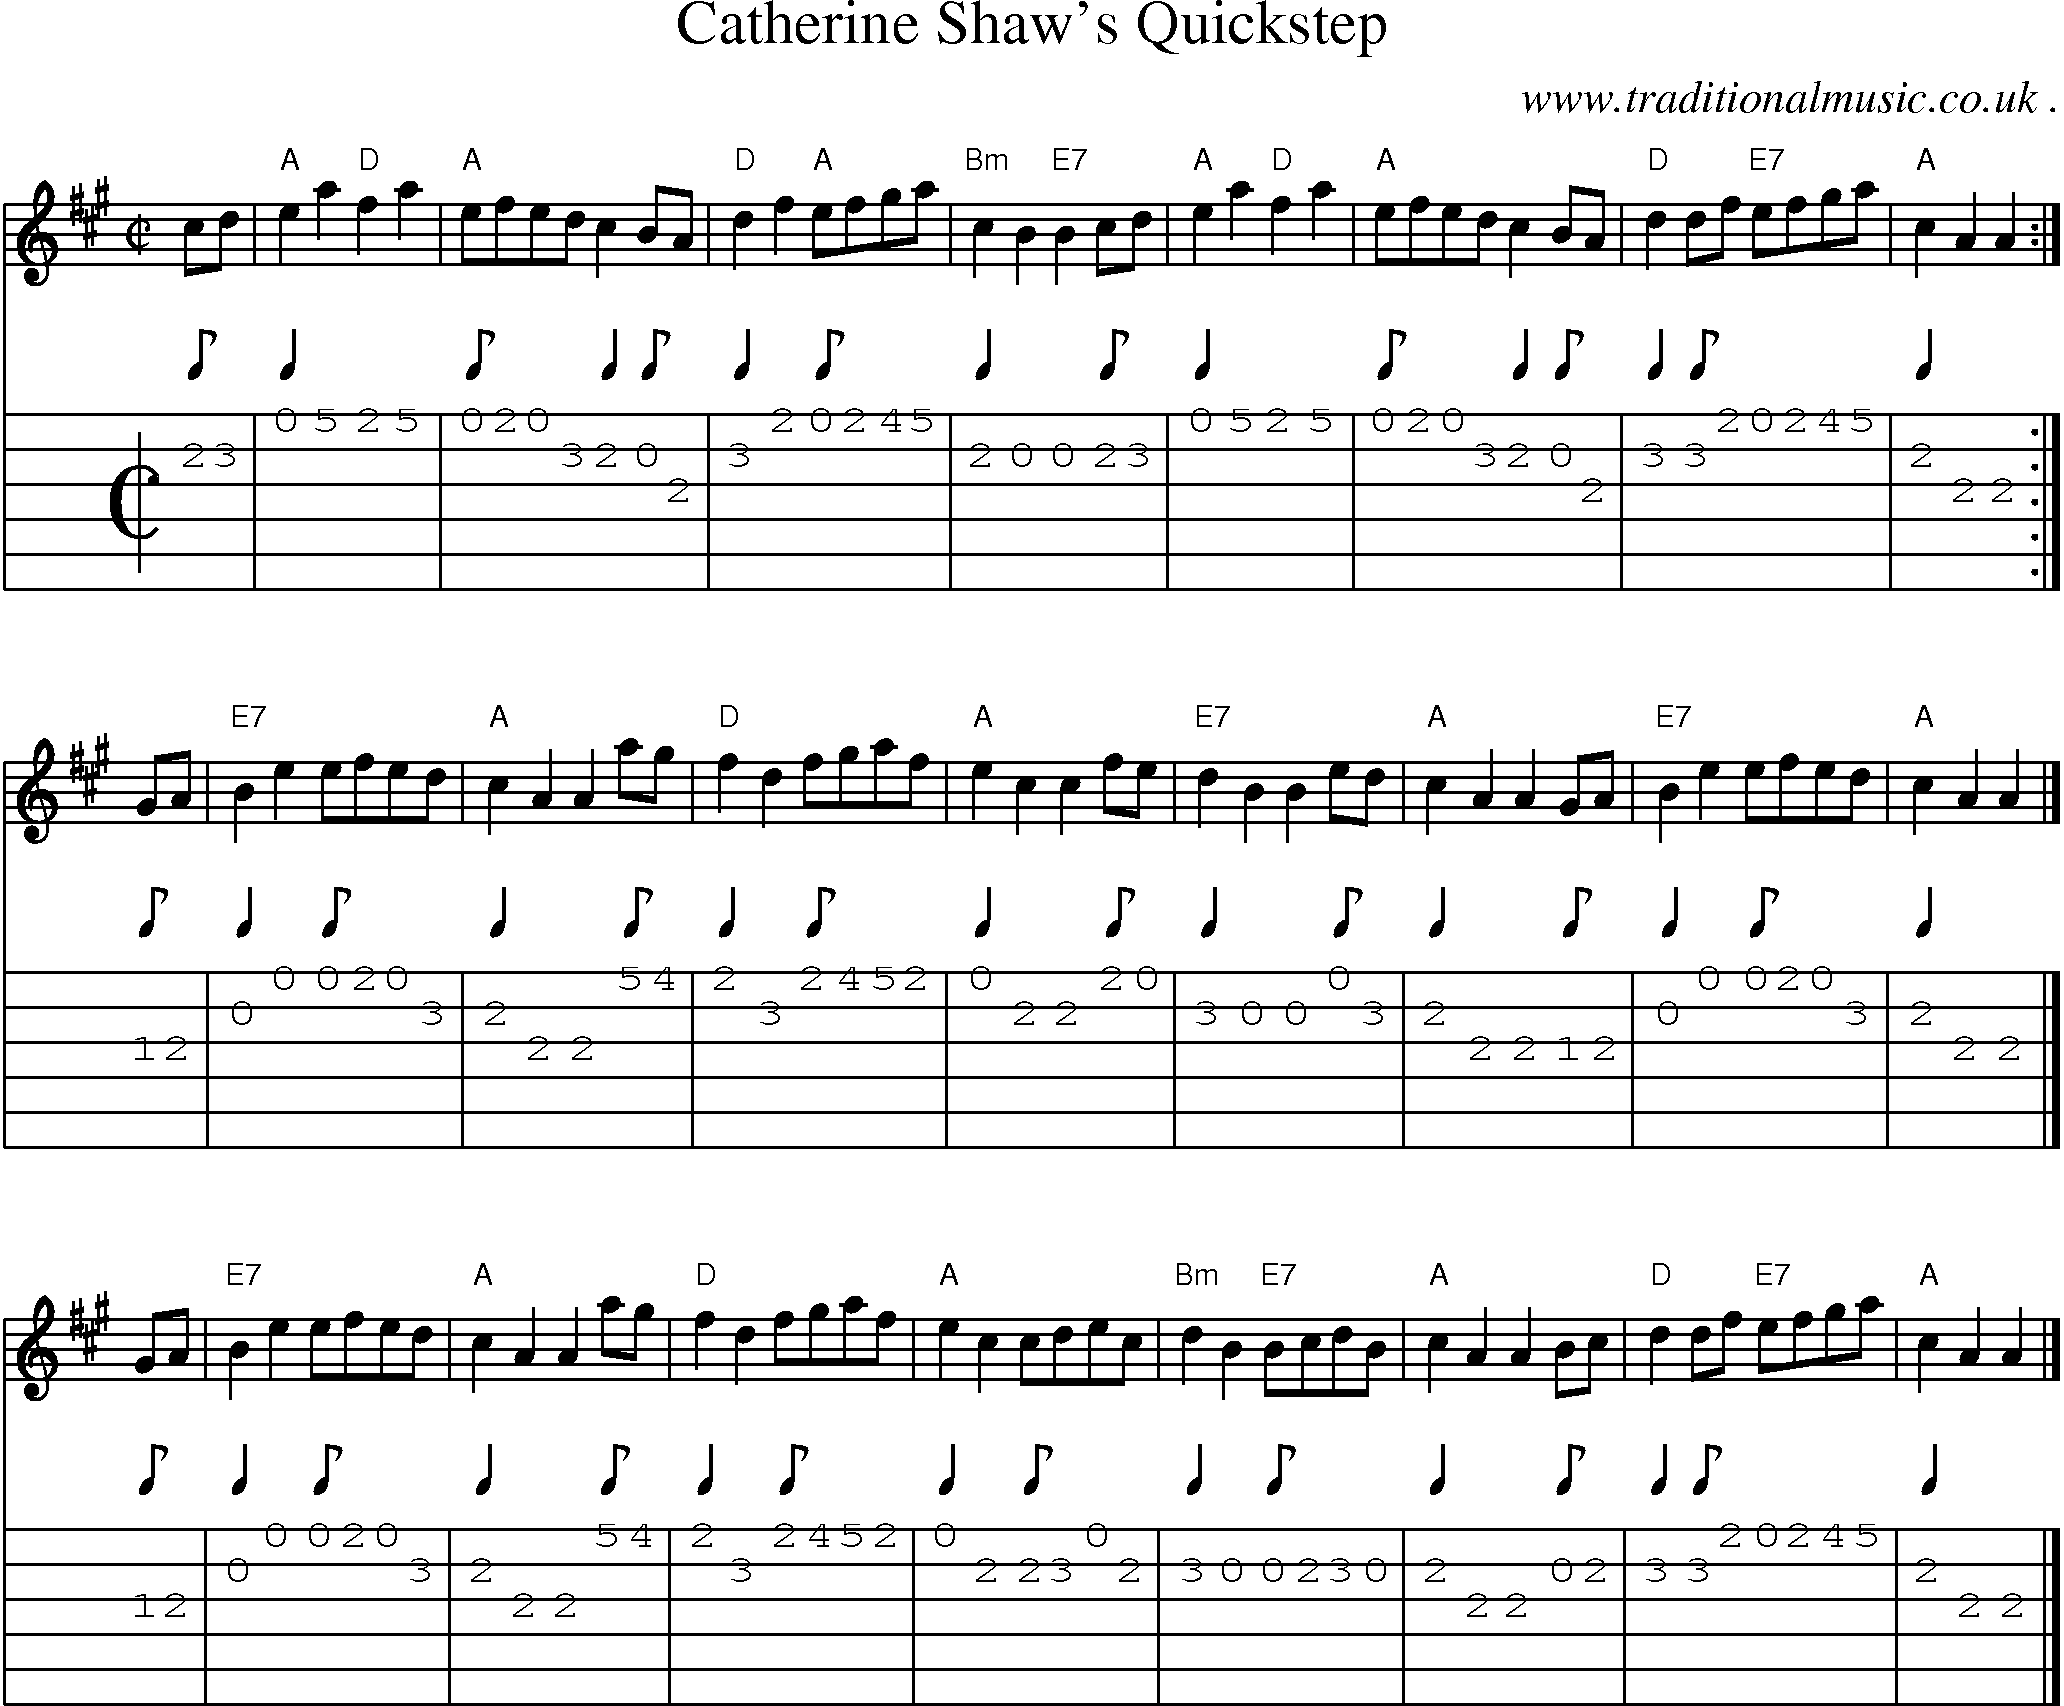 Sheet-music  score, Chords and Guitar Tabs for Catherine Shaws Quickstep